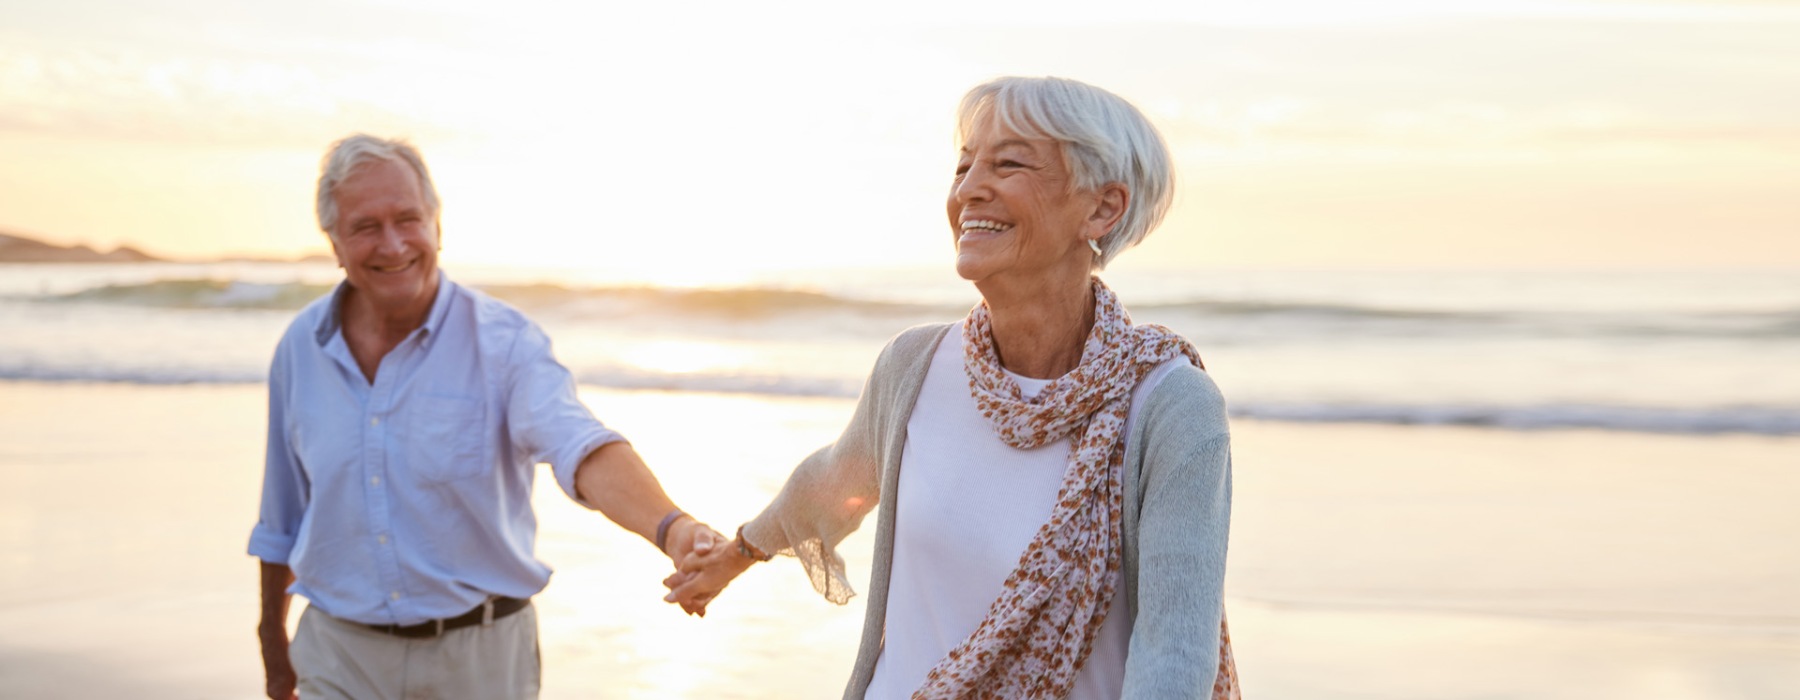 Senior couple holding hands while walking on the beach and sunset and laughing